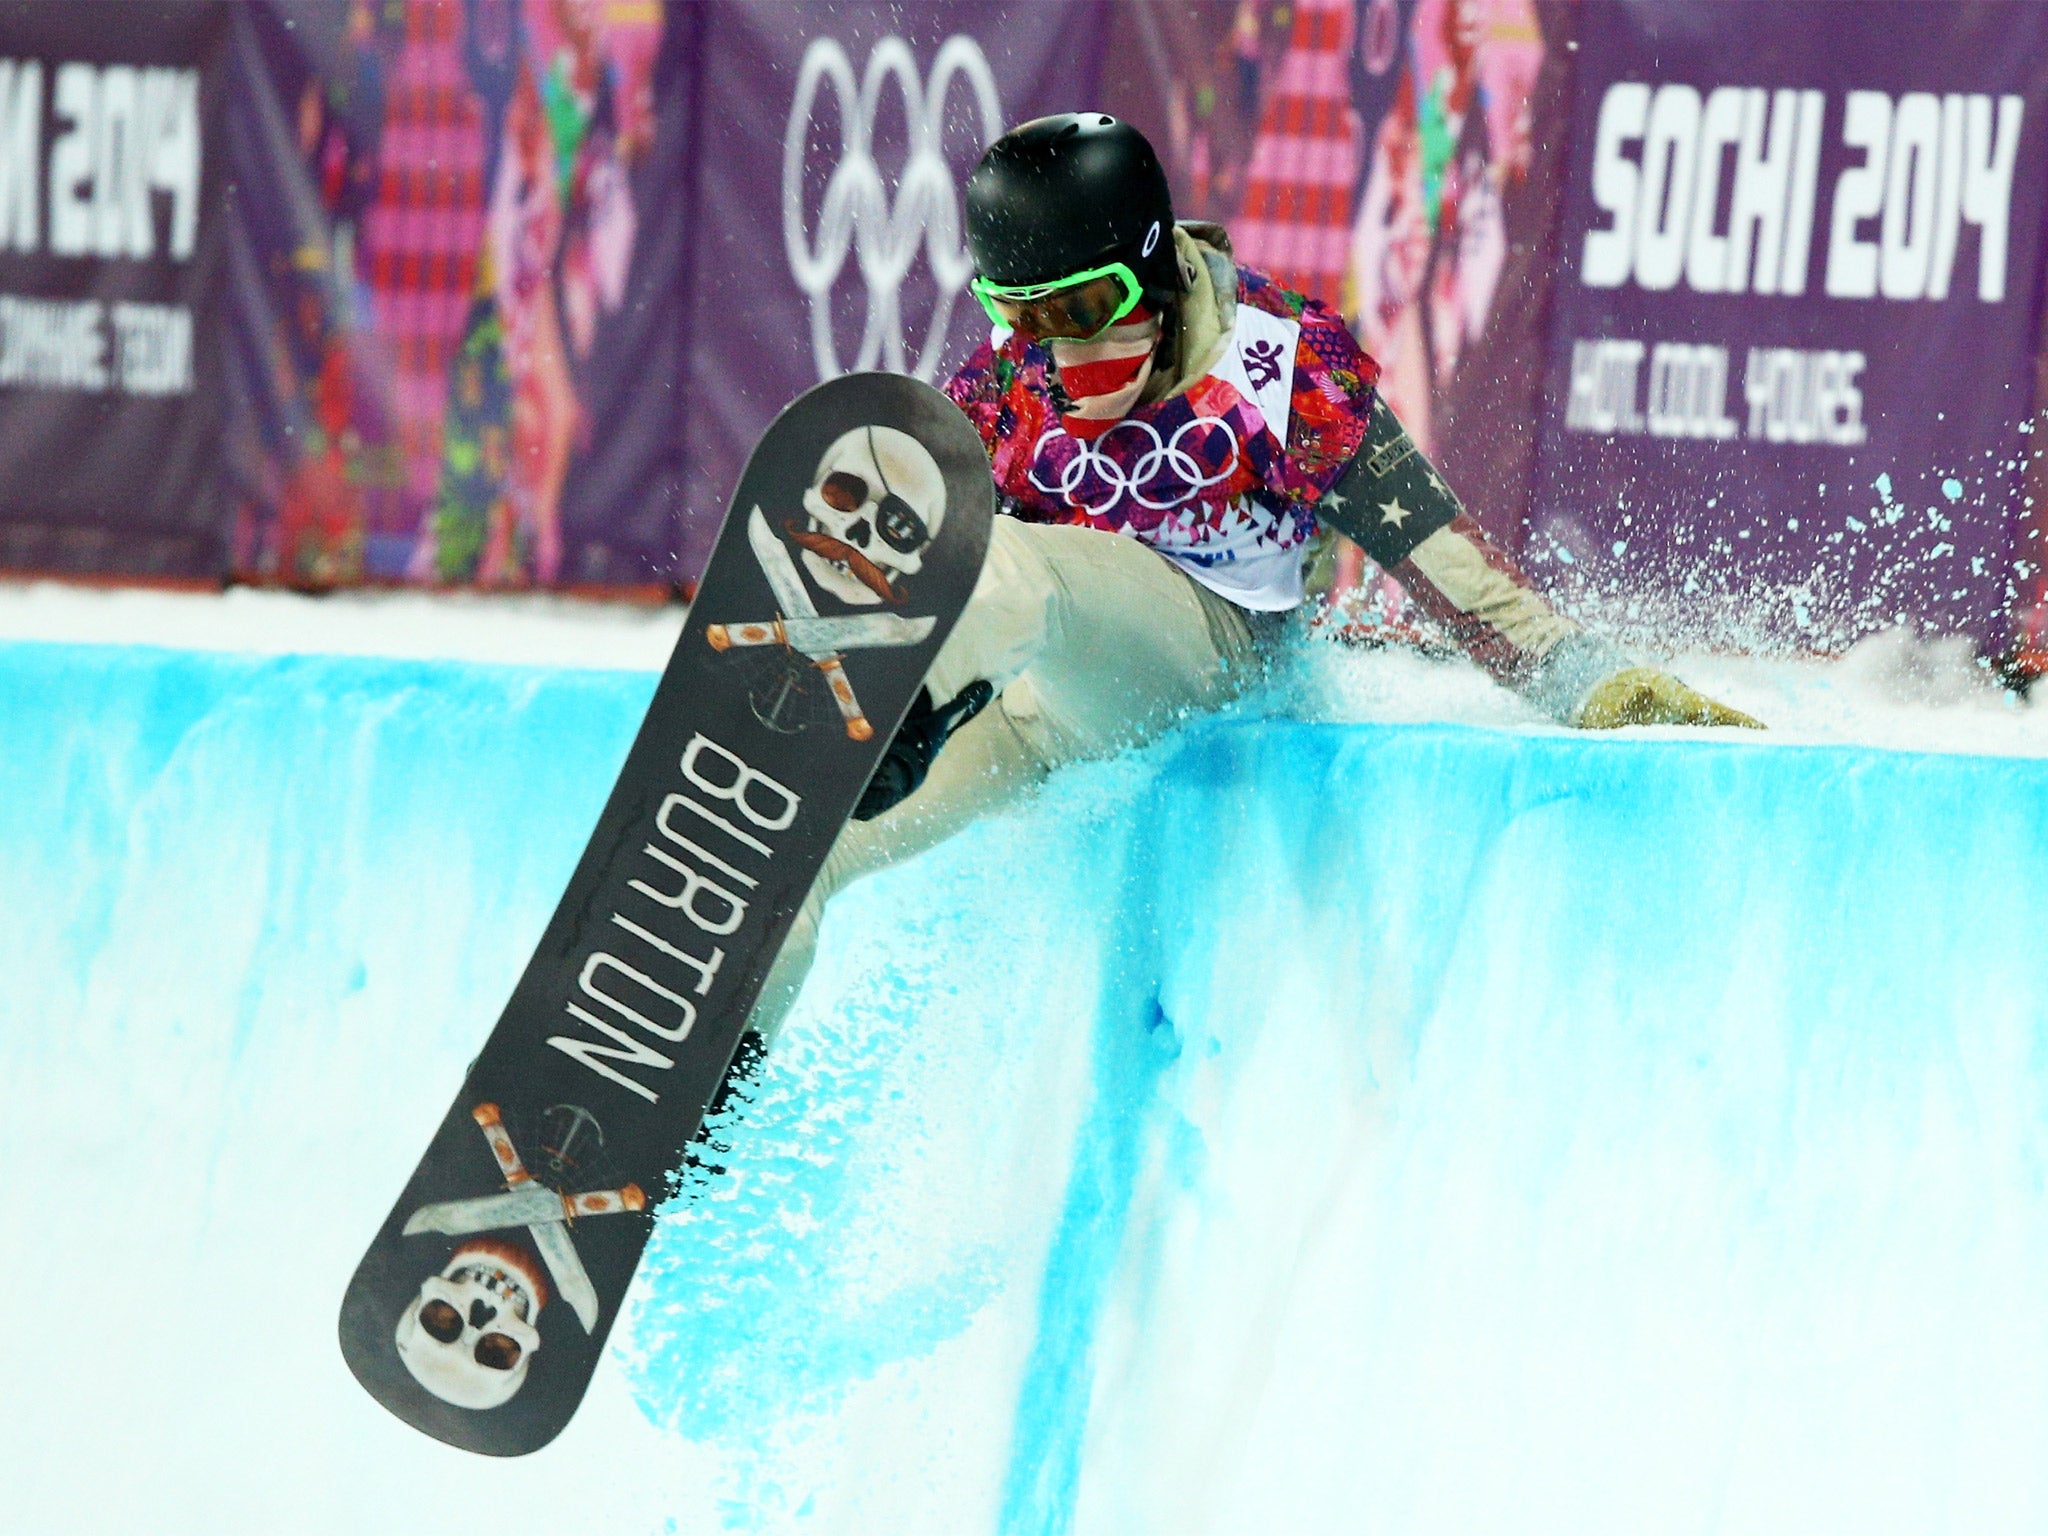 Shaun White crashes on the lip of the half-pipe